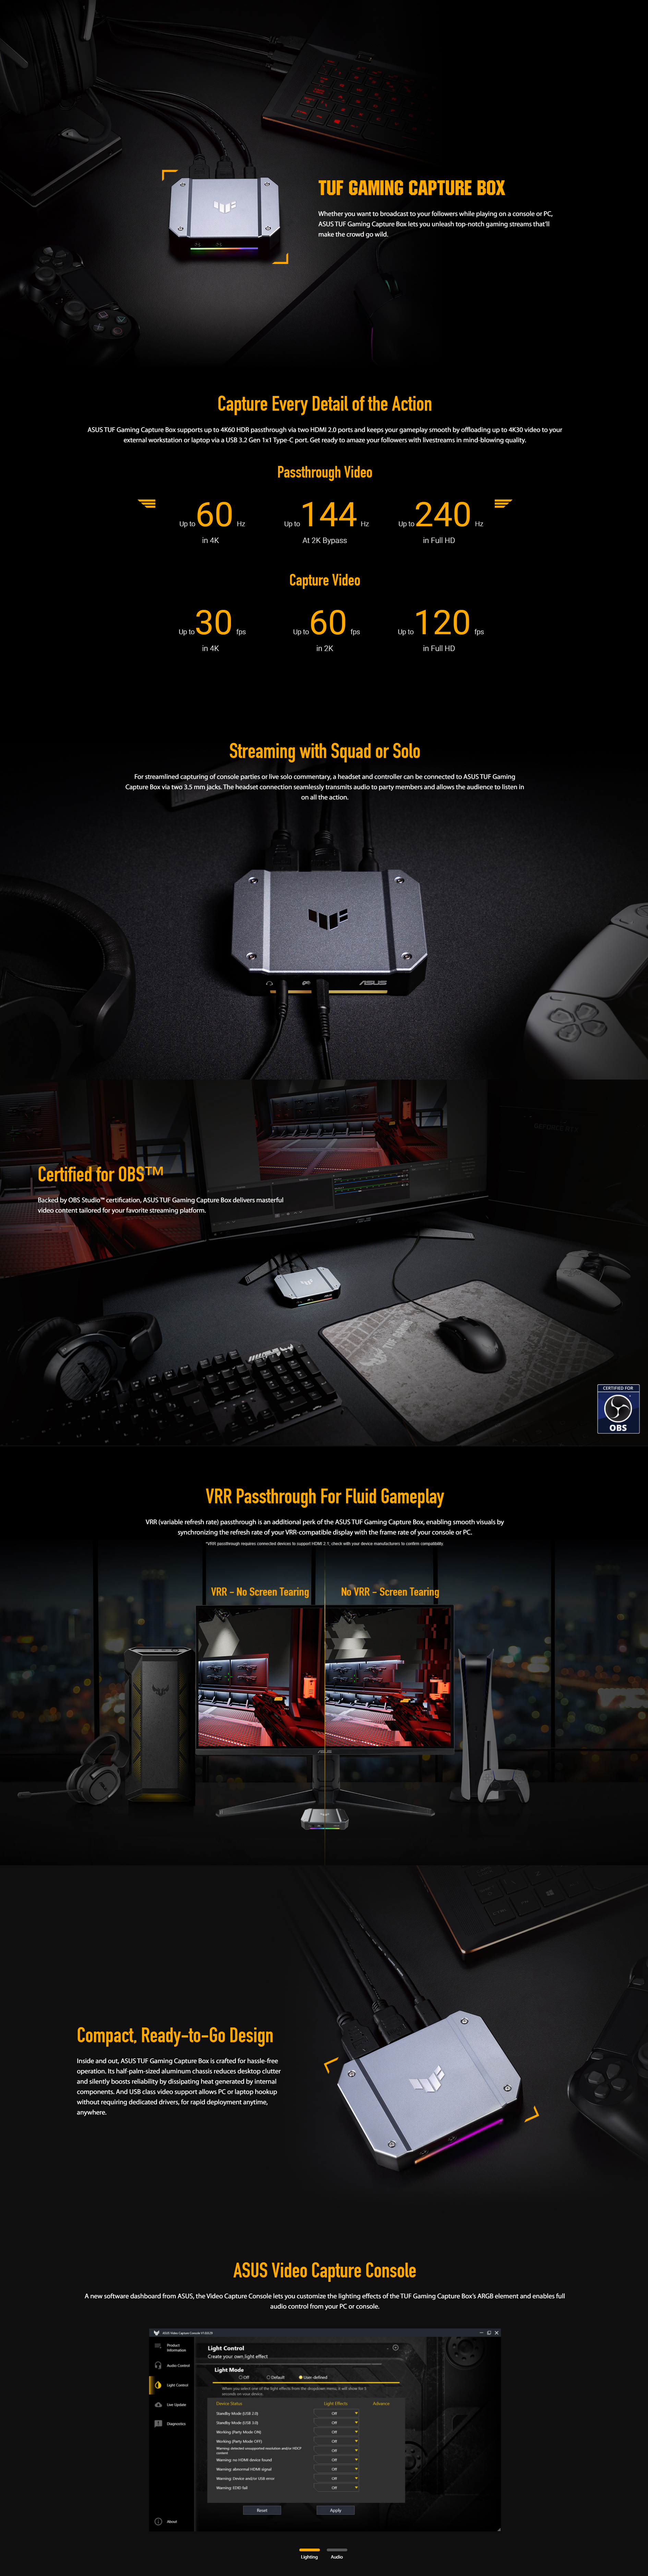 A large marketing image providing additional information about the product ASUS TUF Gaming Capture Box CU4K30 - Additional alt info not provided